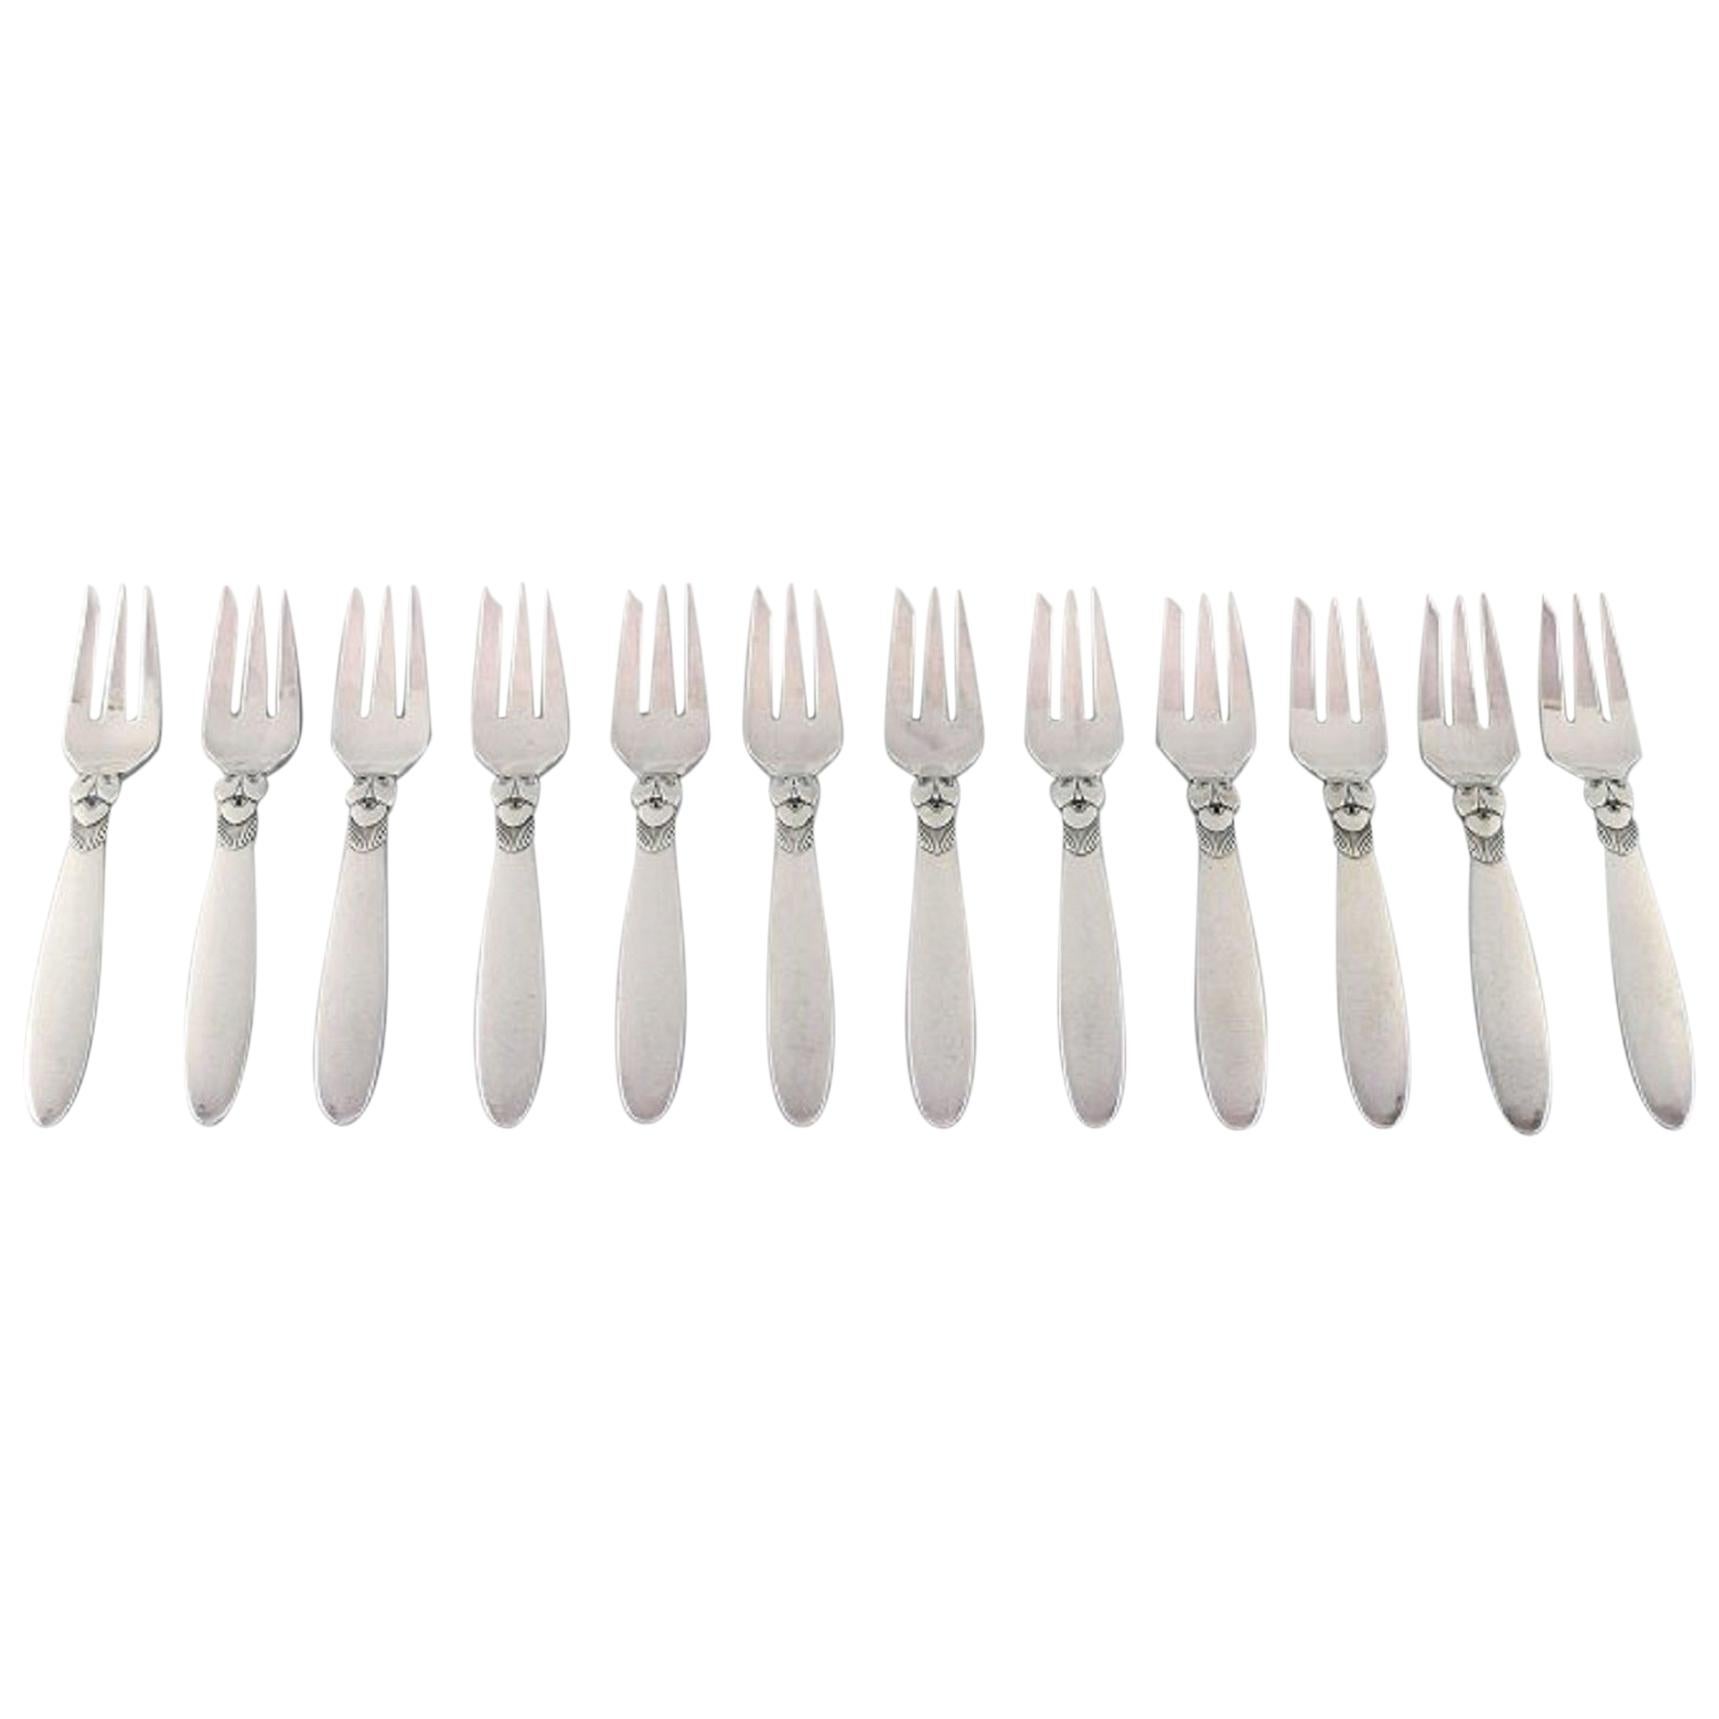 12 Georg Jensen Cactus Pastry Forks in Sterling Silver For Sale